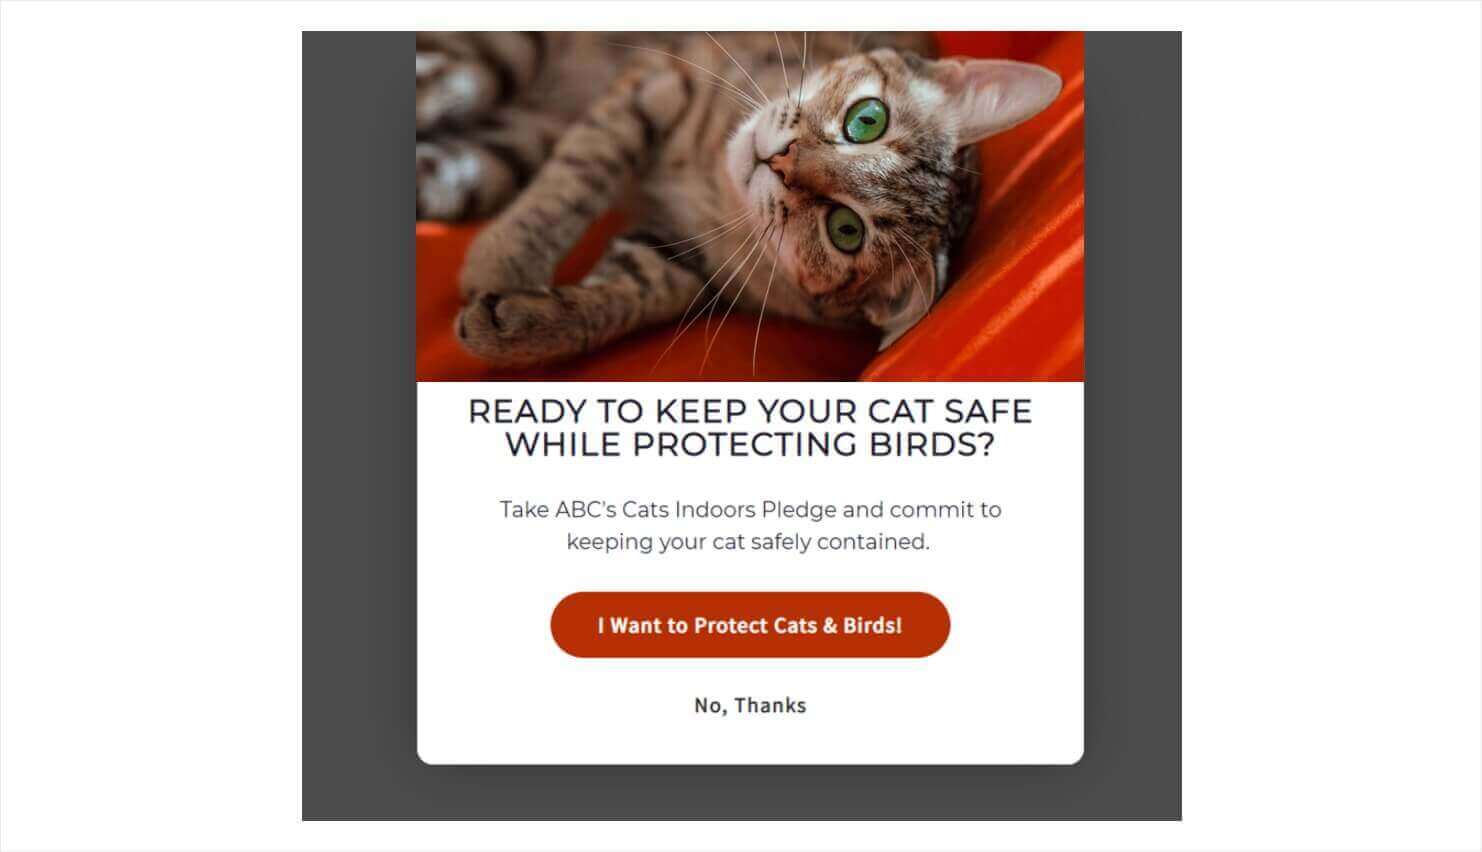 American Bird Conservancy popup that says "Ready to keep your cat safe while protecting birds? Take ABC's Cats Indoors Pledge and commit to keeping your cat safely contained." Bit CTA button says "I want to protect Cats & Birds!" Below, linked text reads "No, thanks"